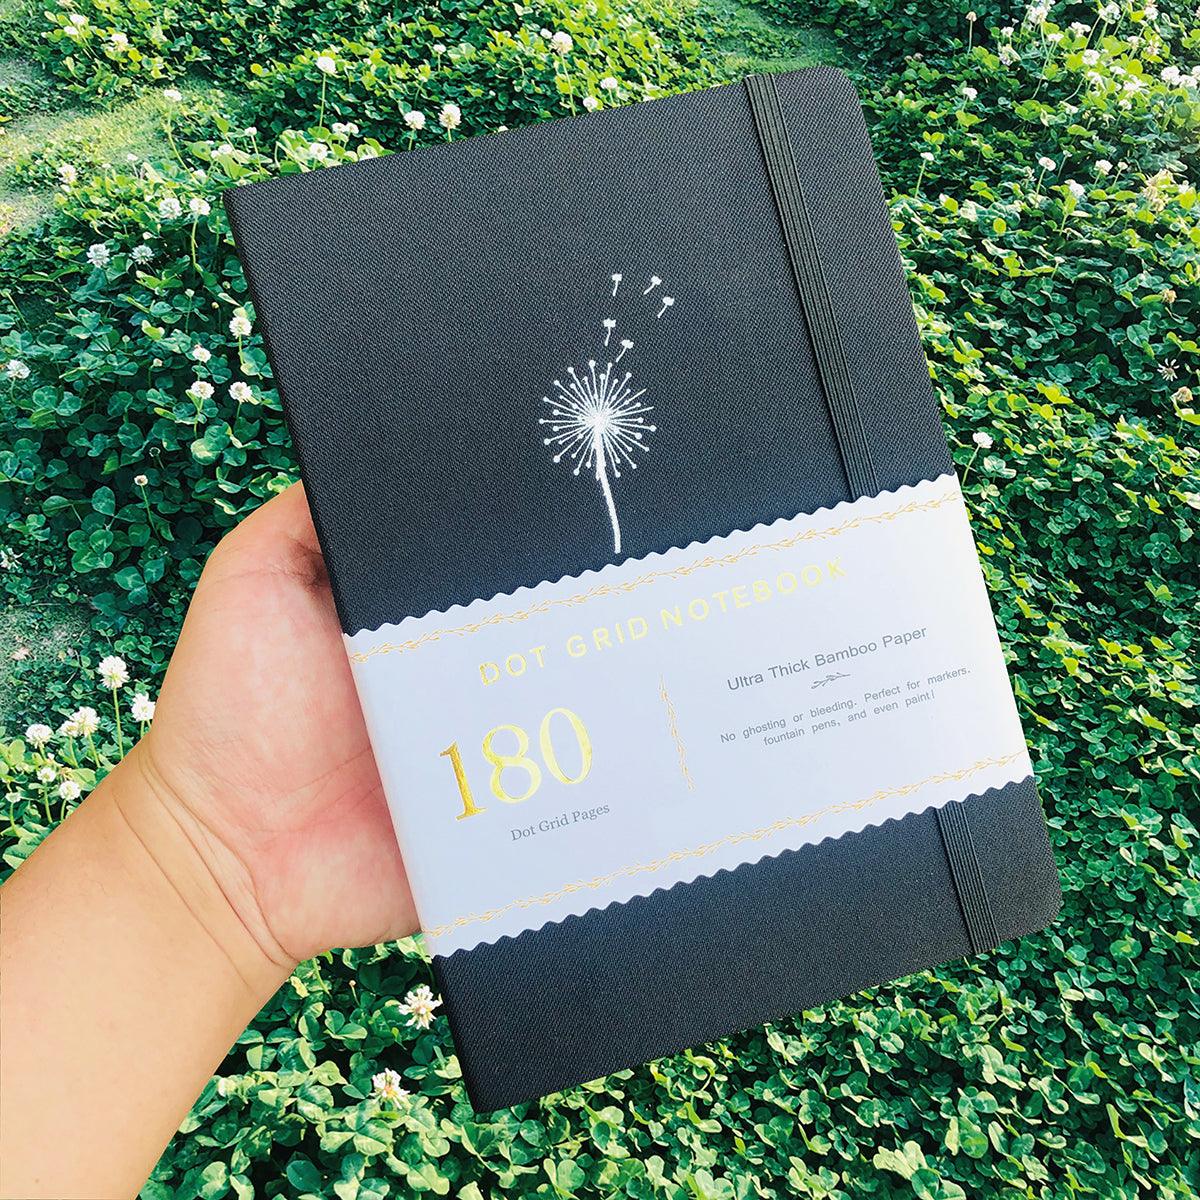 180gsm Bamboo Paper A5 Dandelion Dotted Notebook Bullet Journal